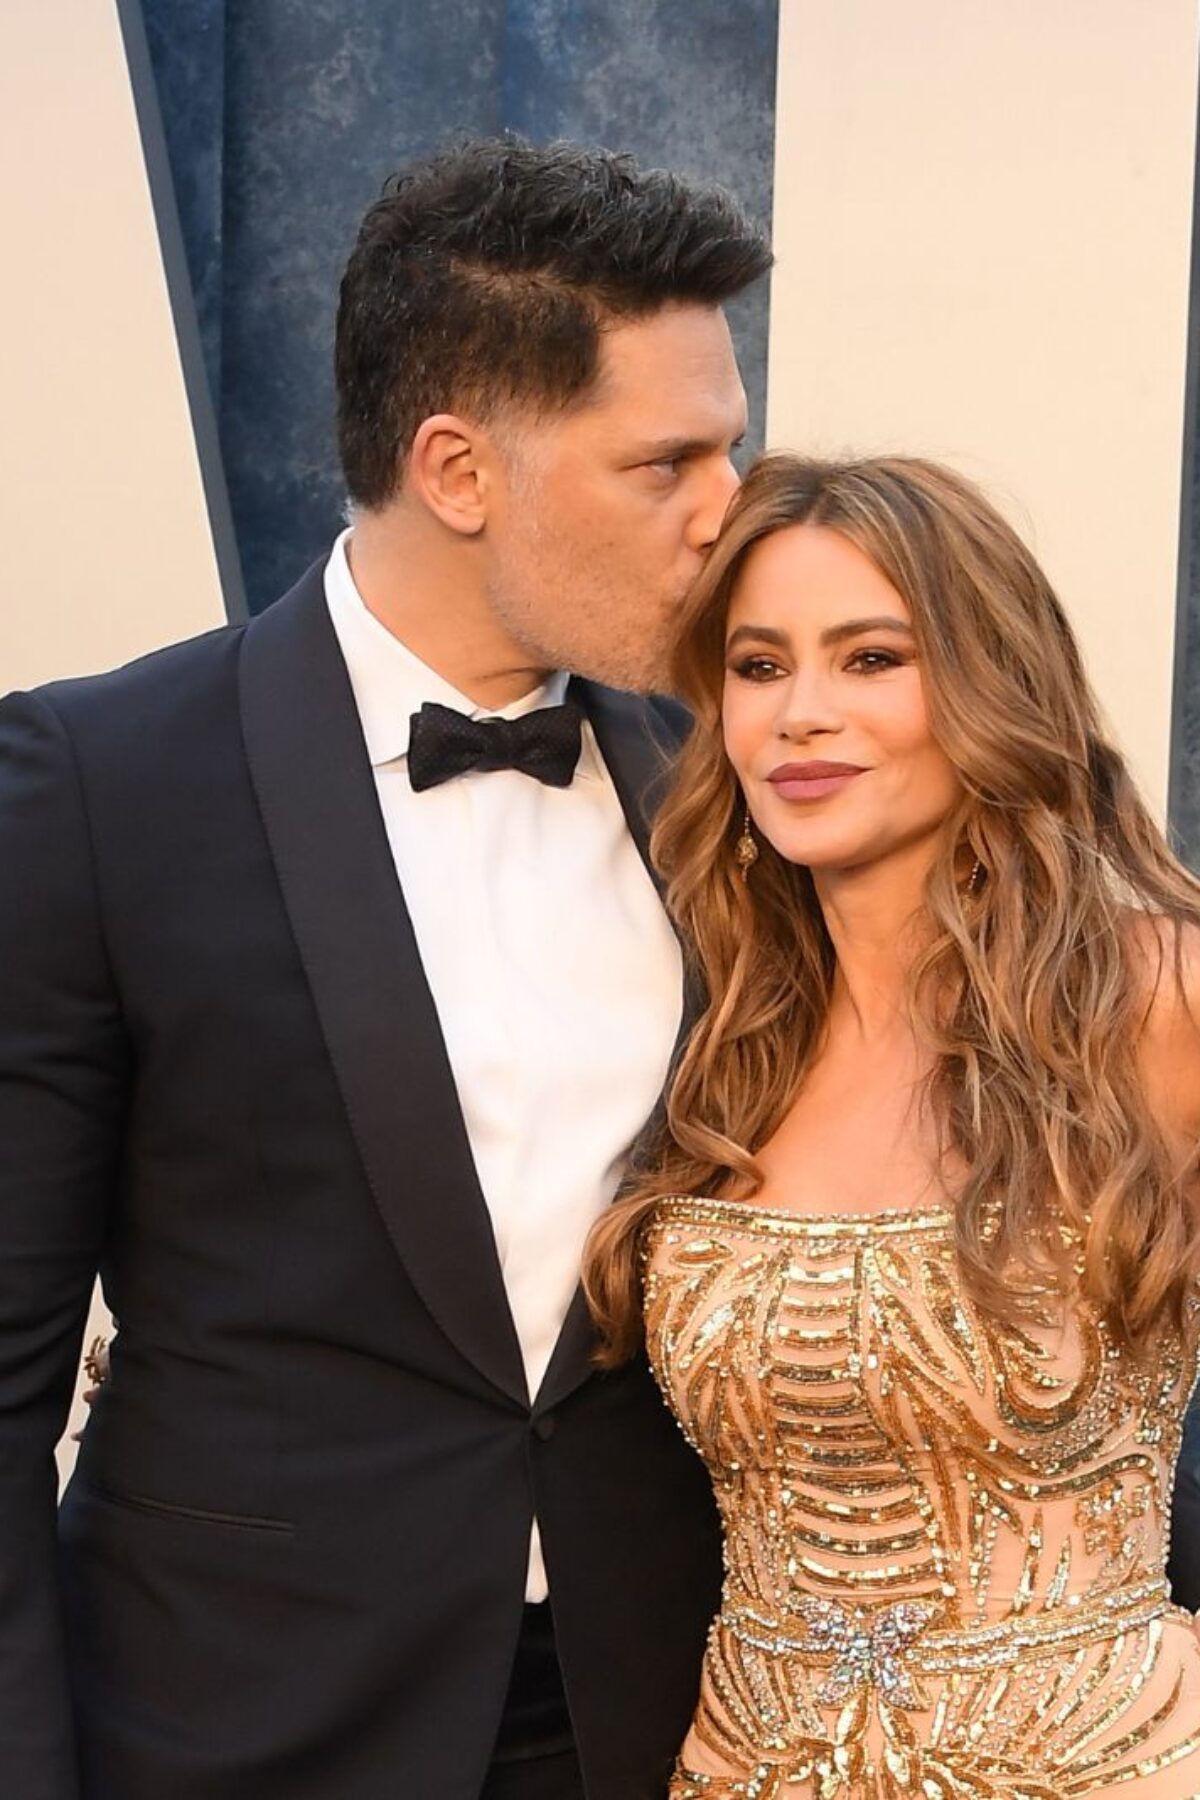 BEVERLY HILLS, CALIFORNIA - MARCH 12: 2023 Sofía Vergara, Joe Manganiello arrives at the Vanity Fair Oscar Party Hosted By Radhika Jones at Wallis Annenberg Center for the Performing Arts on March 12, 2023 in Beverly Hills, California. (Photo by Steve Granitz/FilmMagic)